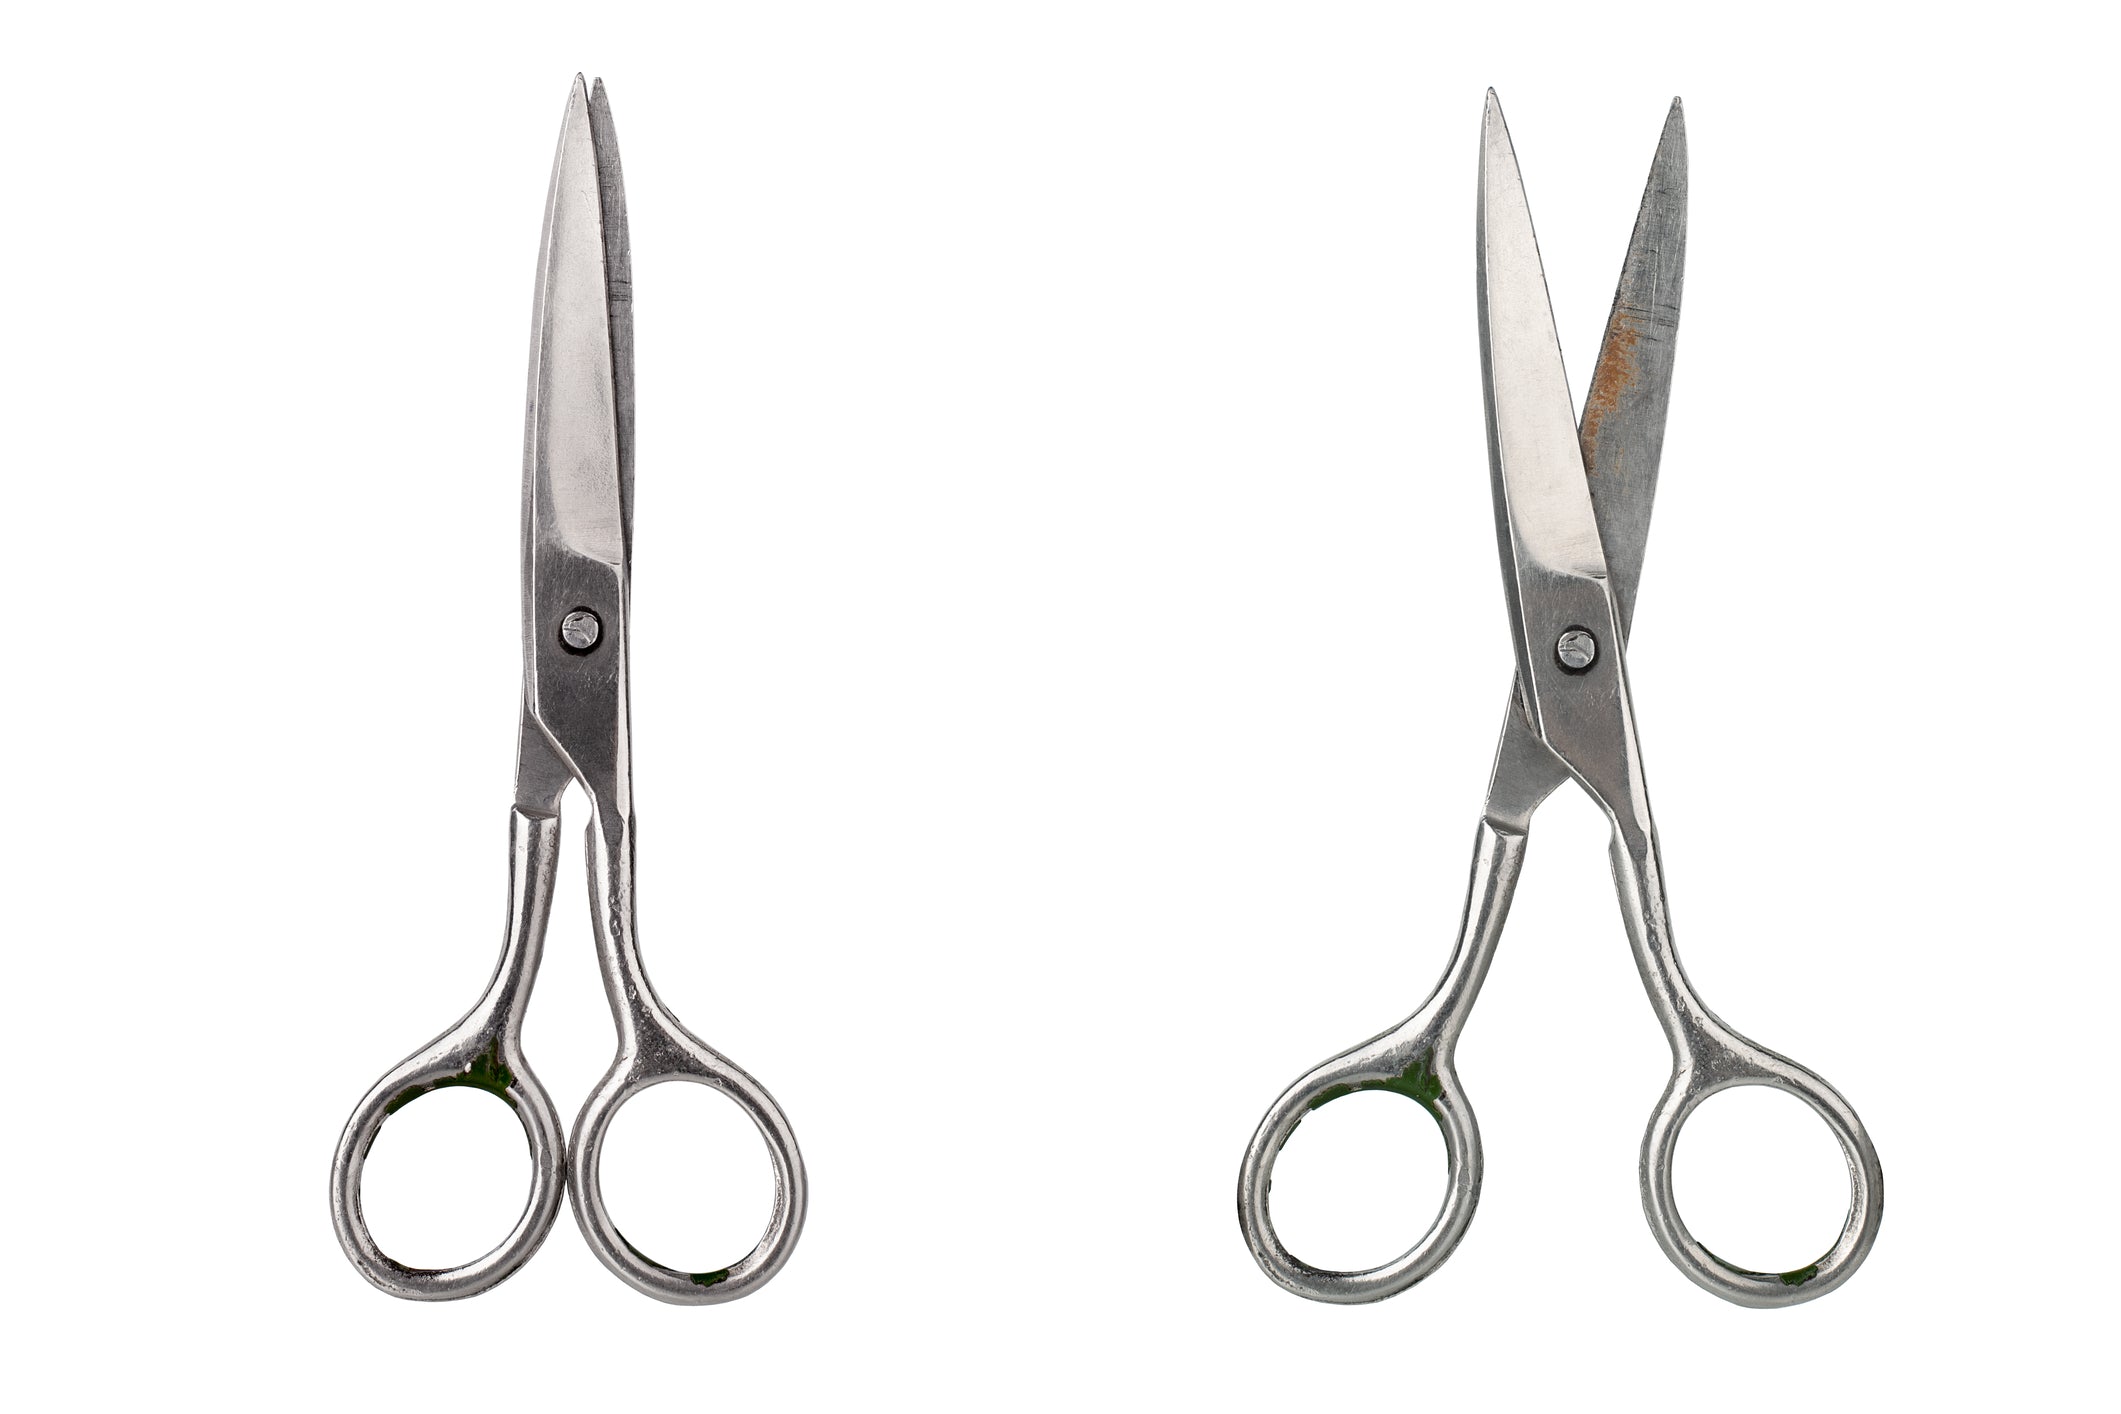 The Different Kinds of Hair Scissors